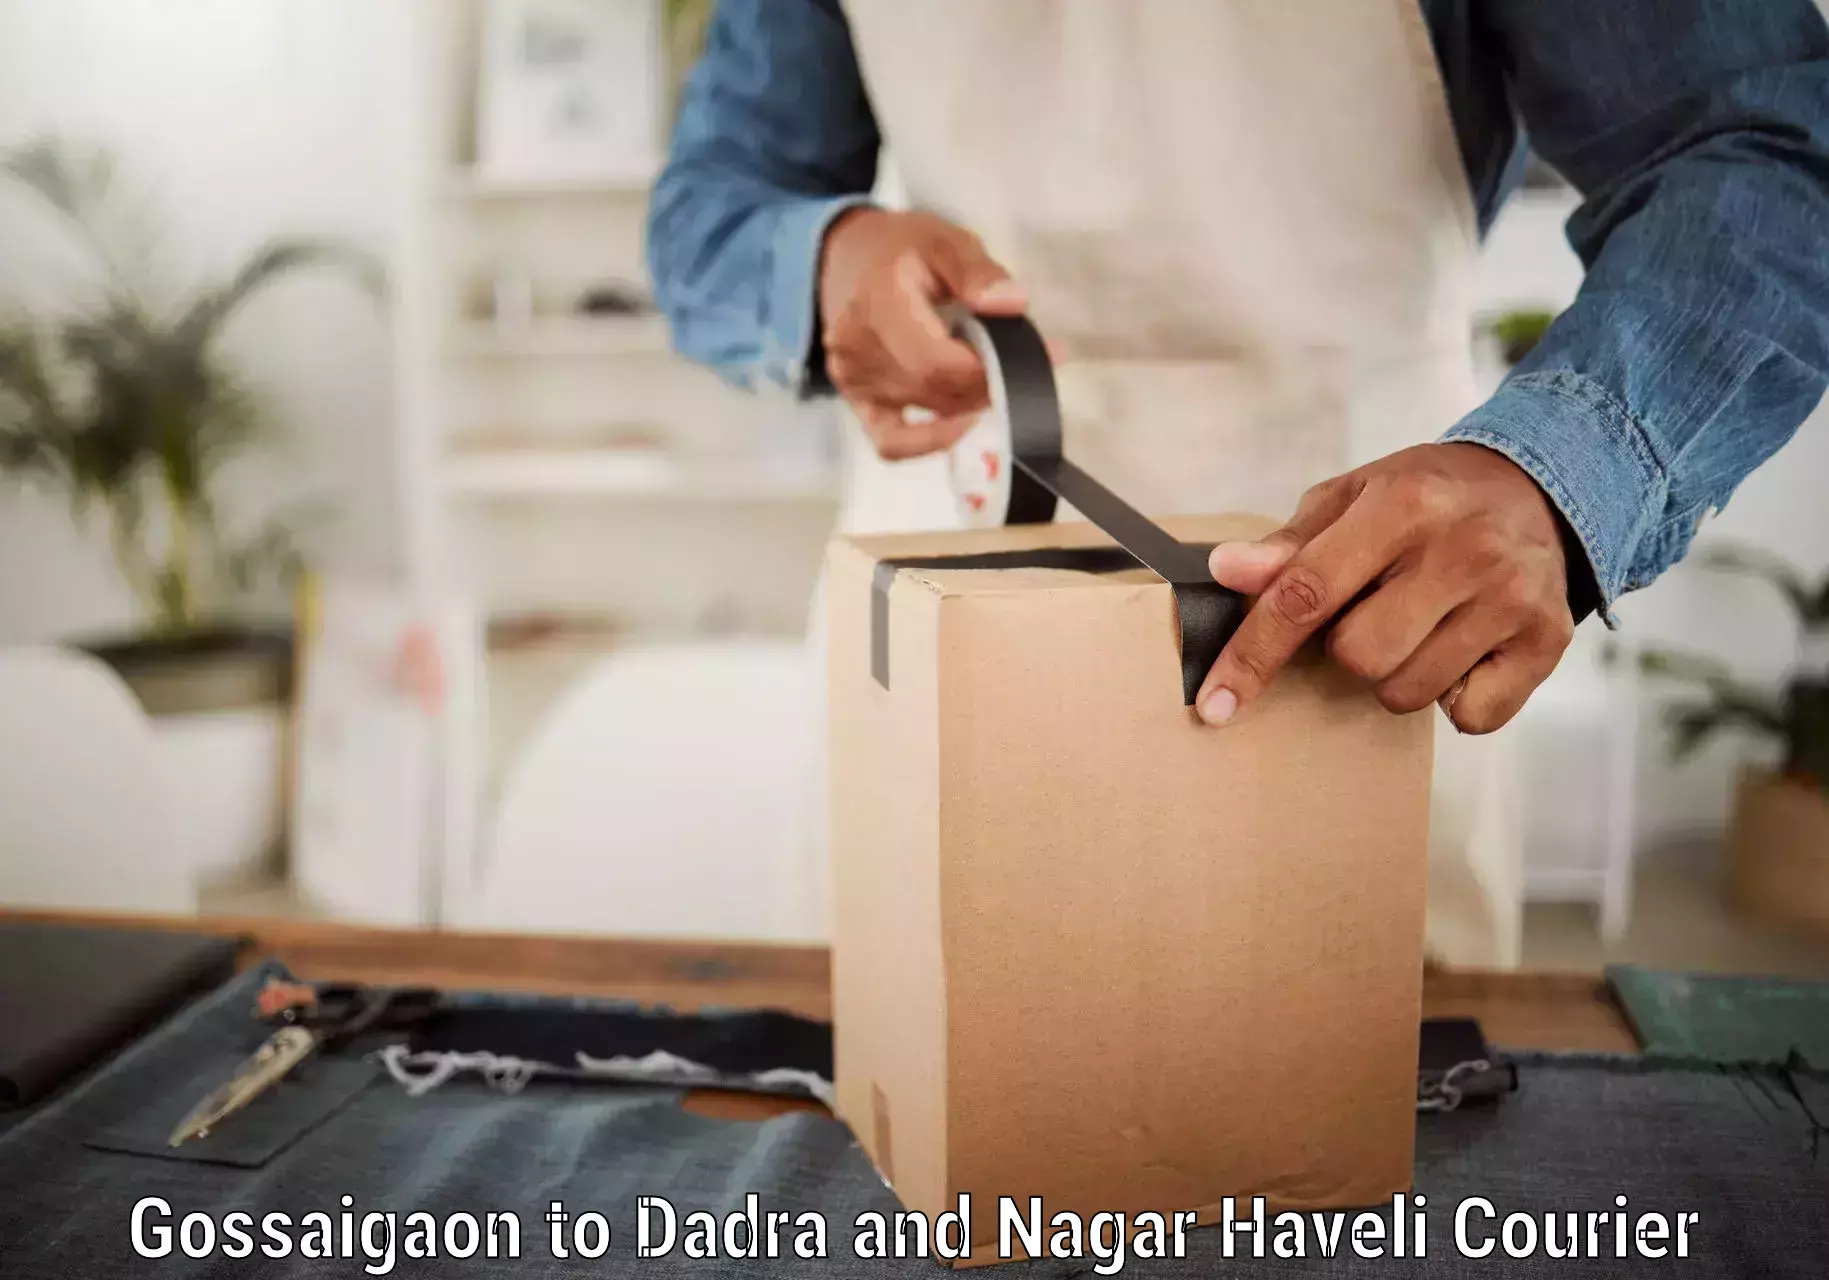 Professional courier services Gossaigaon to Dadra and Nagar Haveli